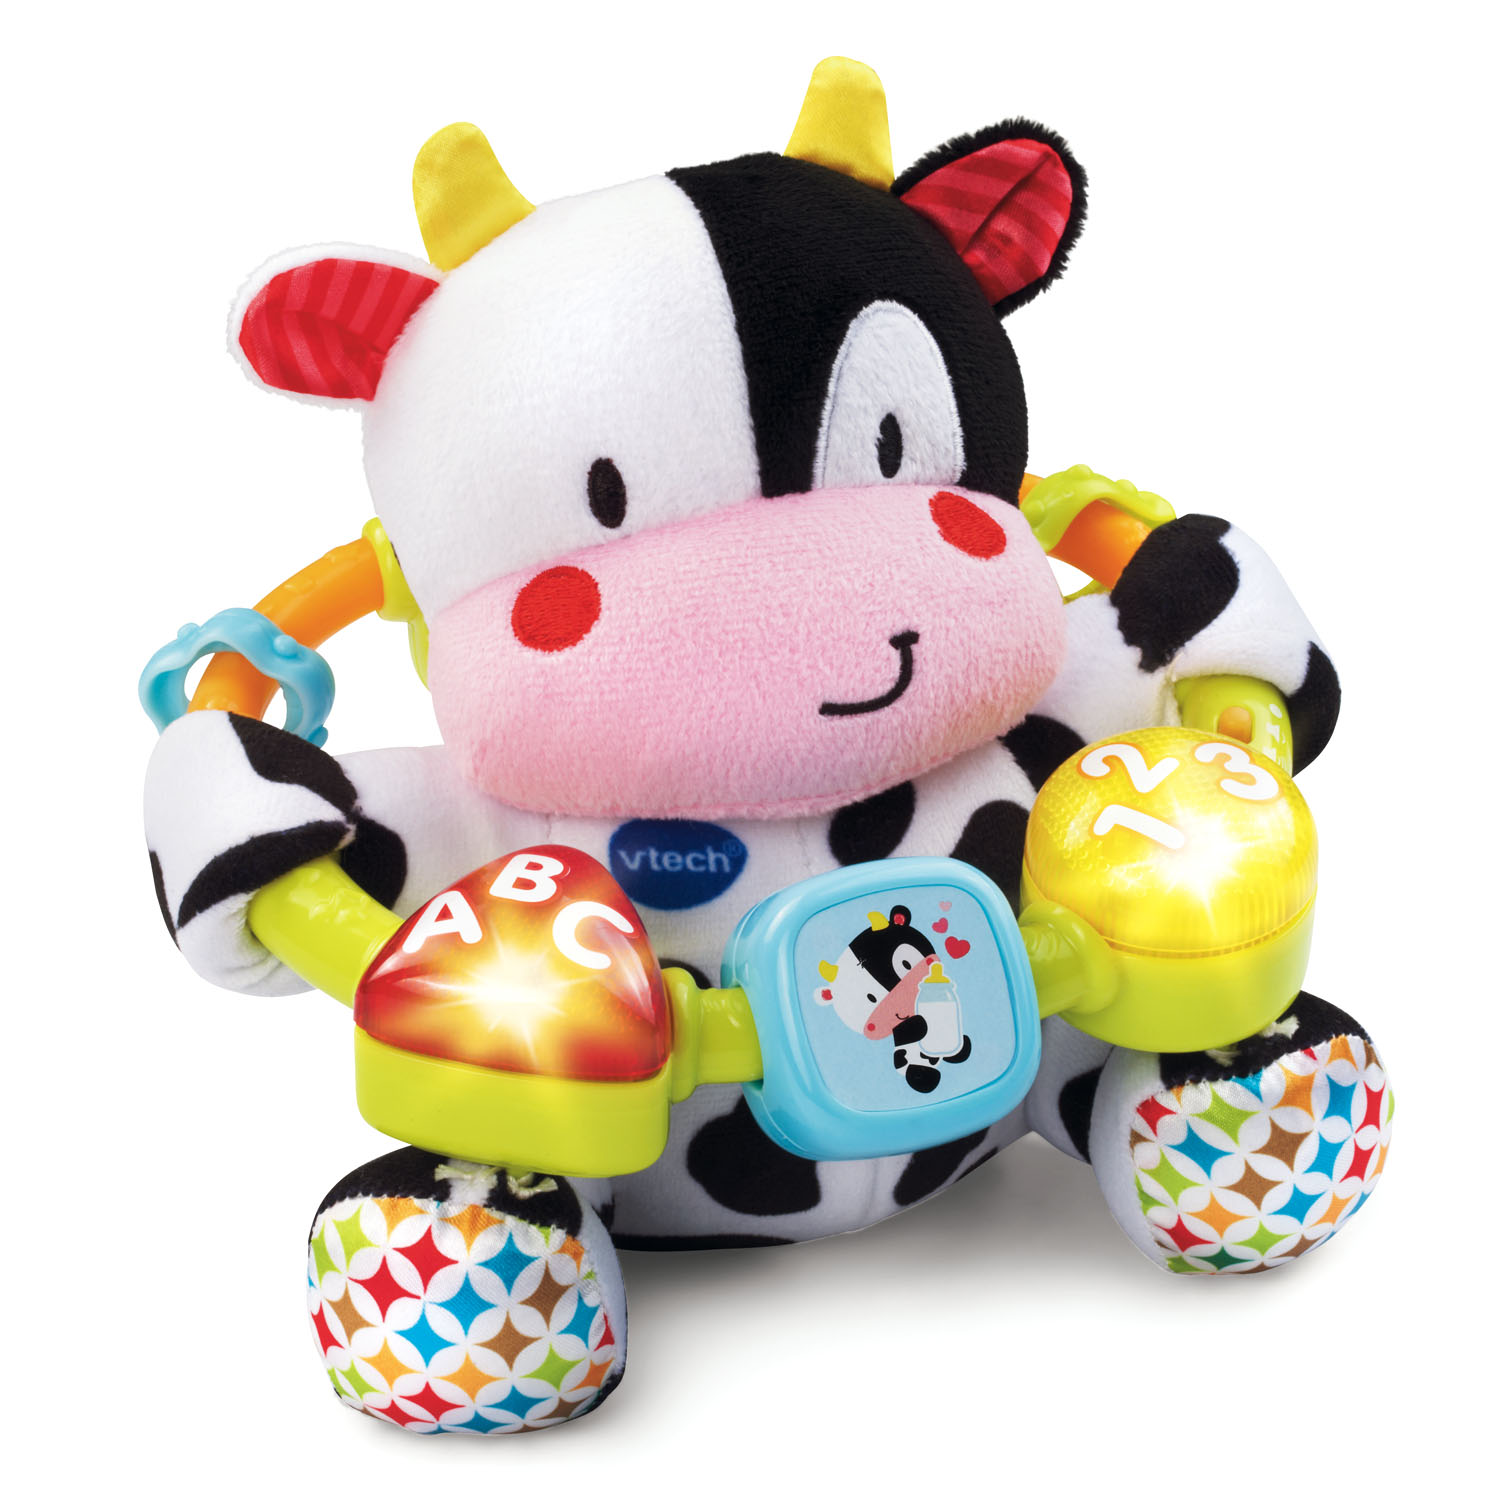 VTech Lil' Critters Moosical Beads, Plush Cow, Musical Baby Toy - image 3 of 7